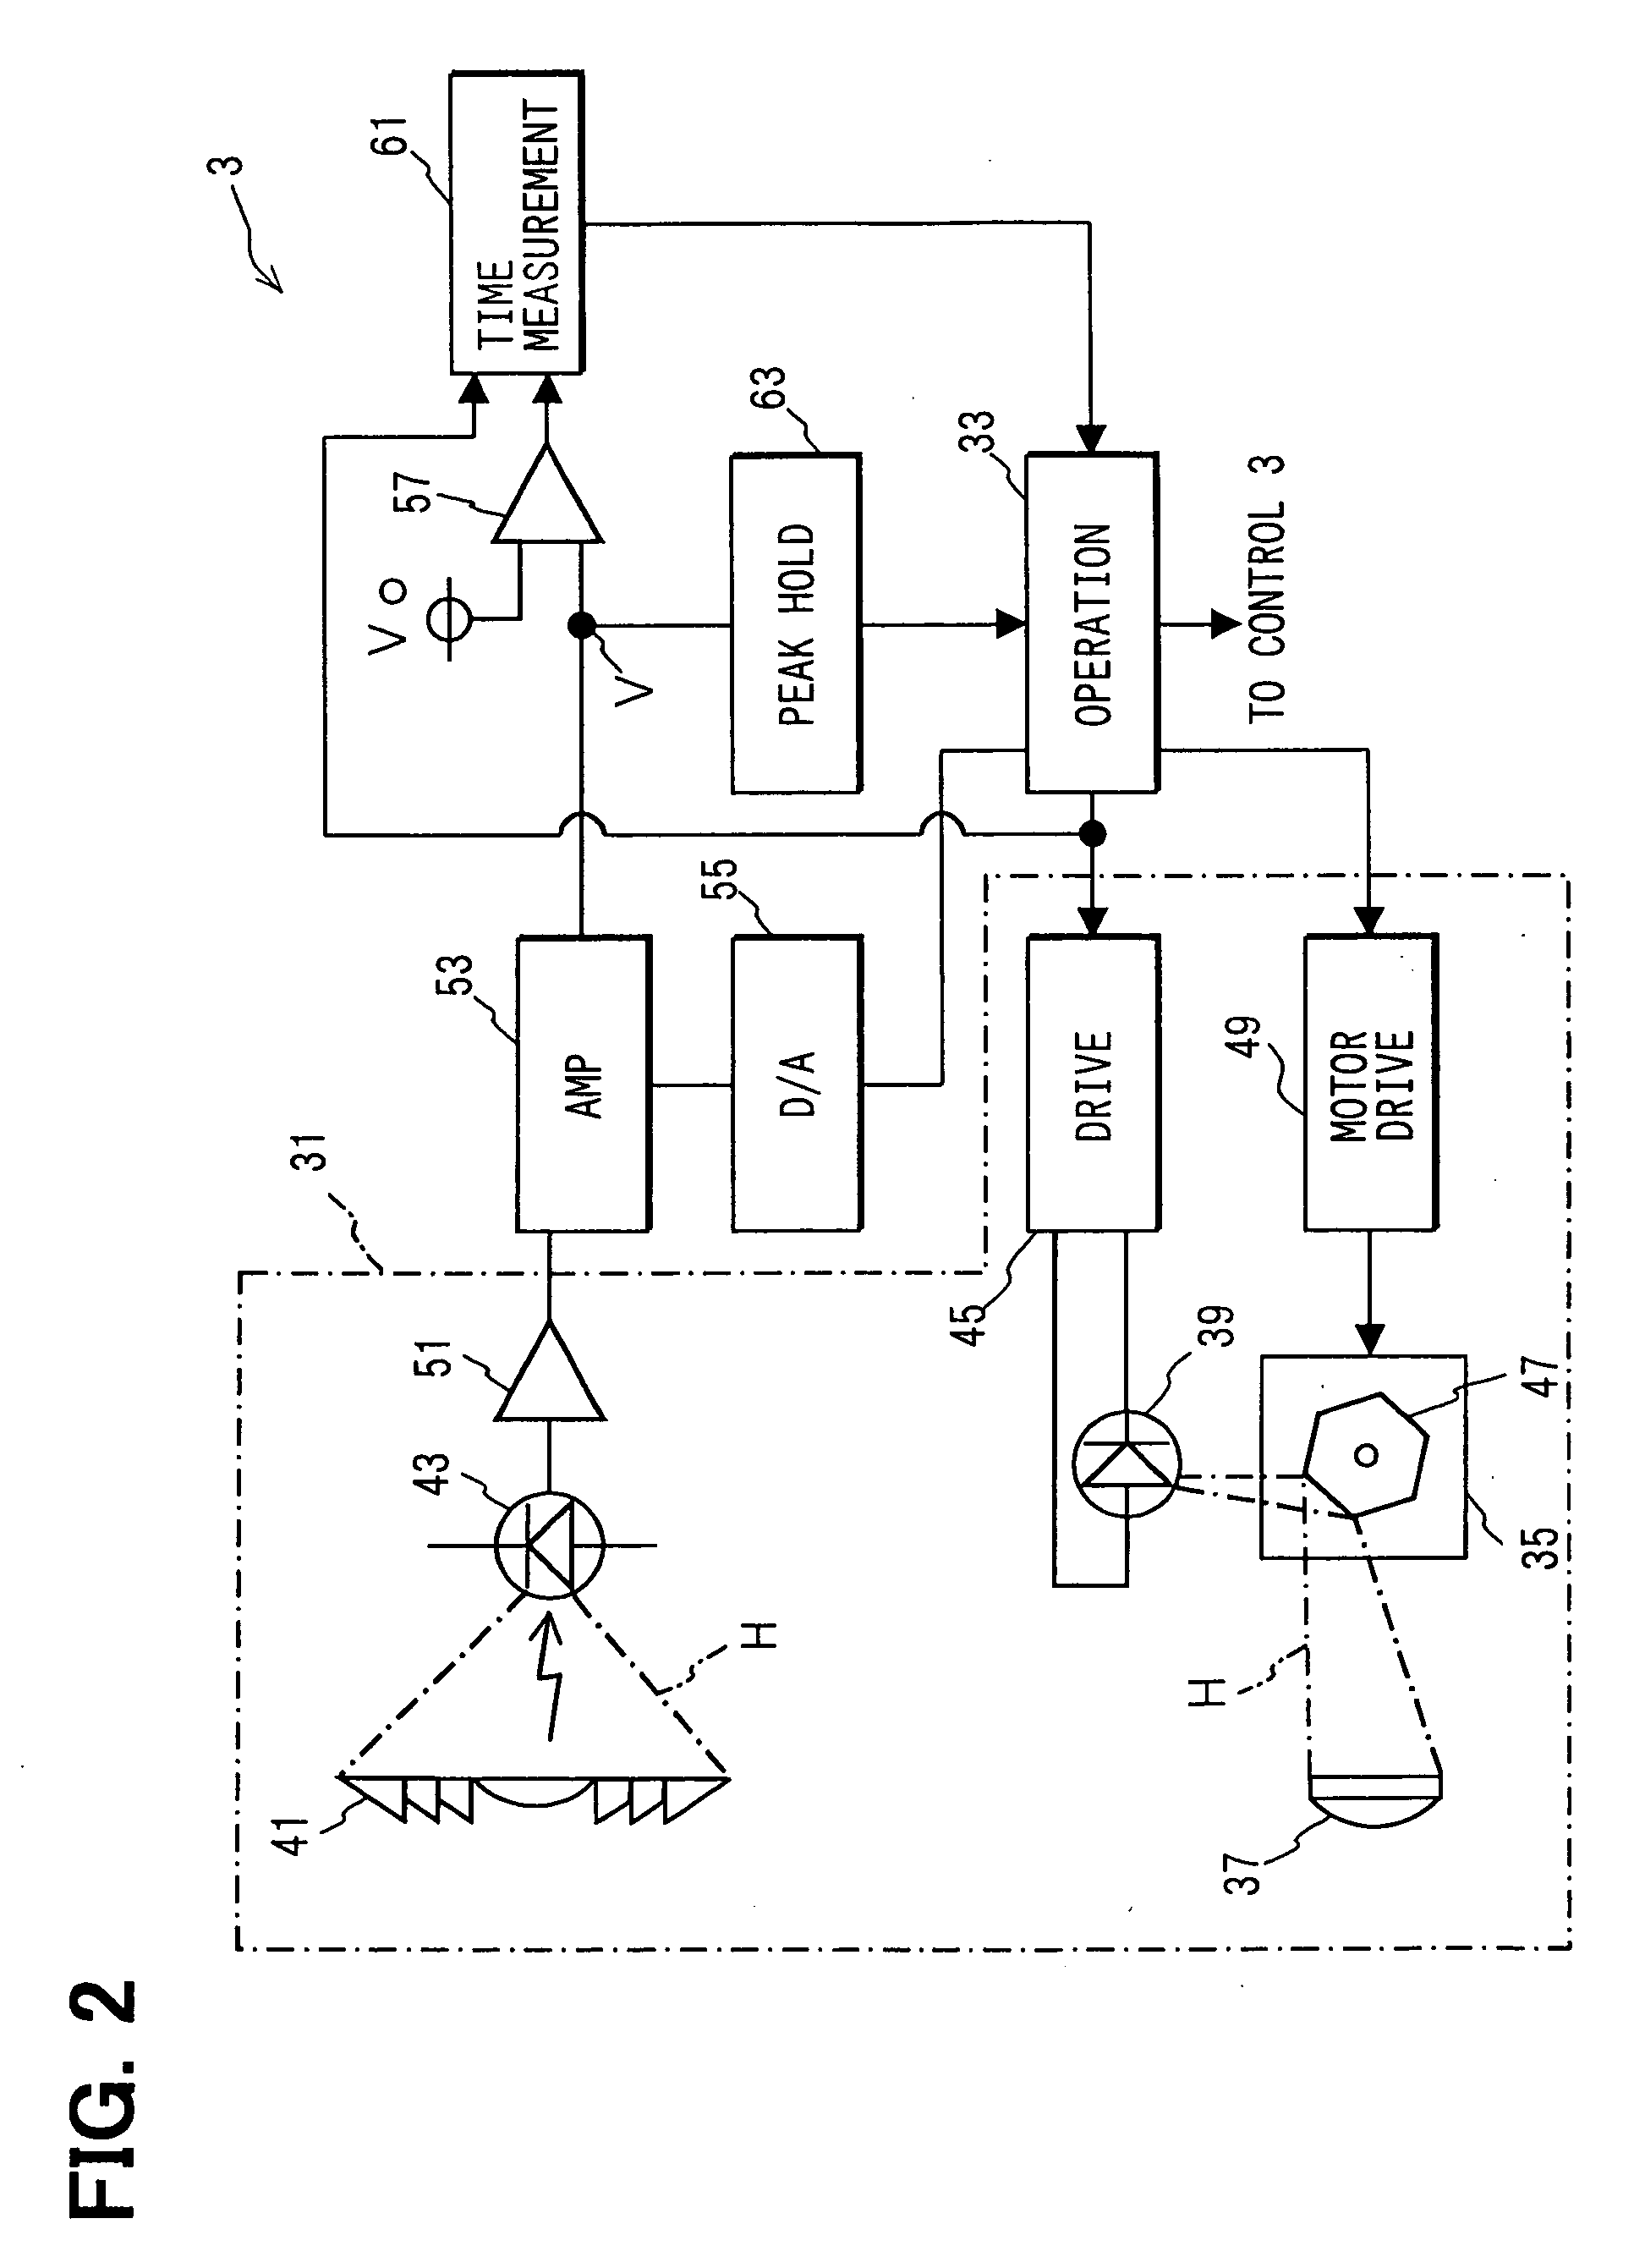 Method for detecting an obstacle around a vehicle